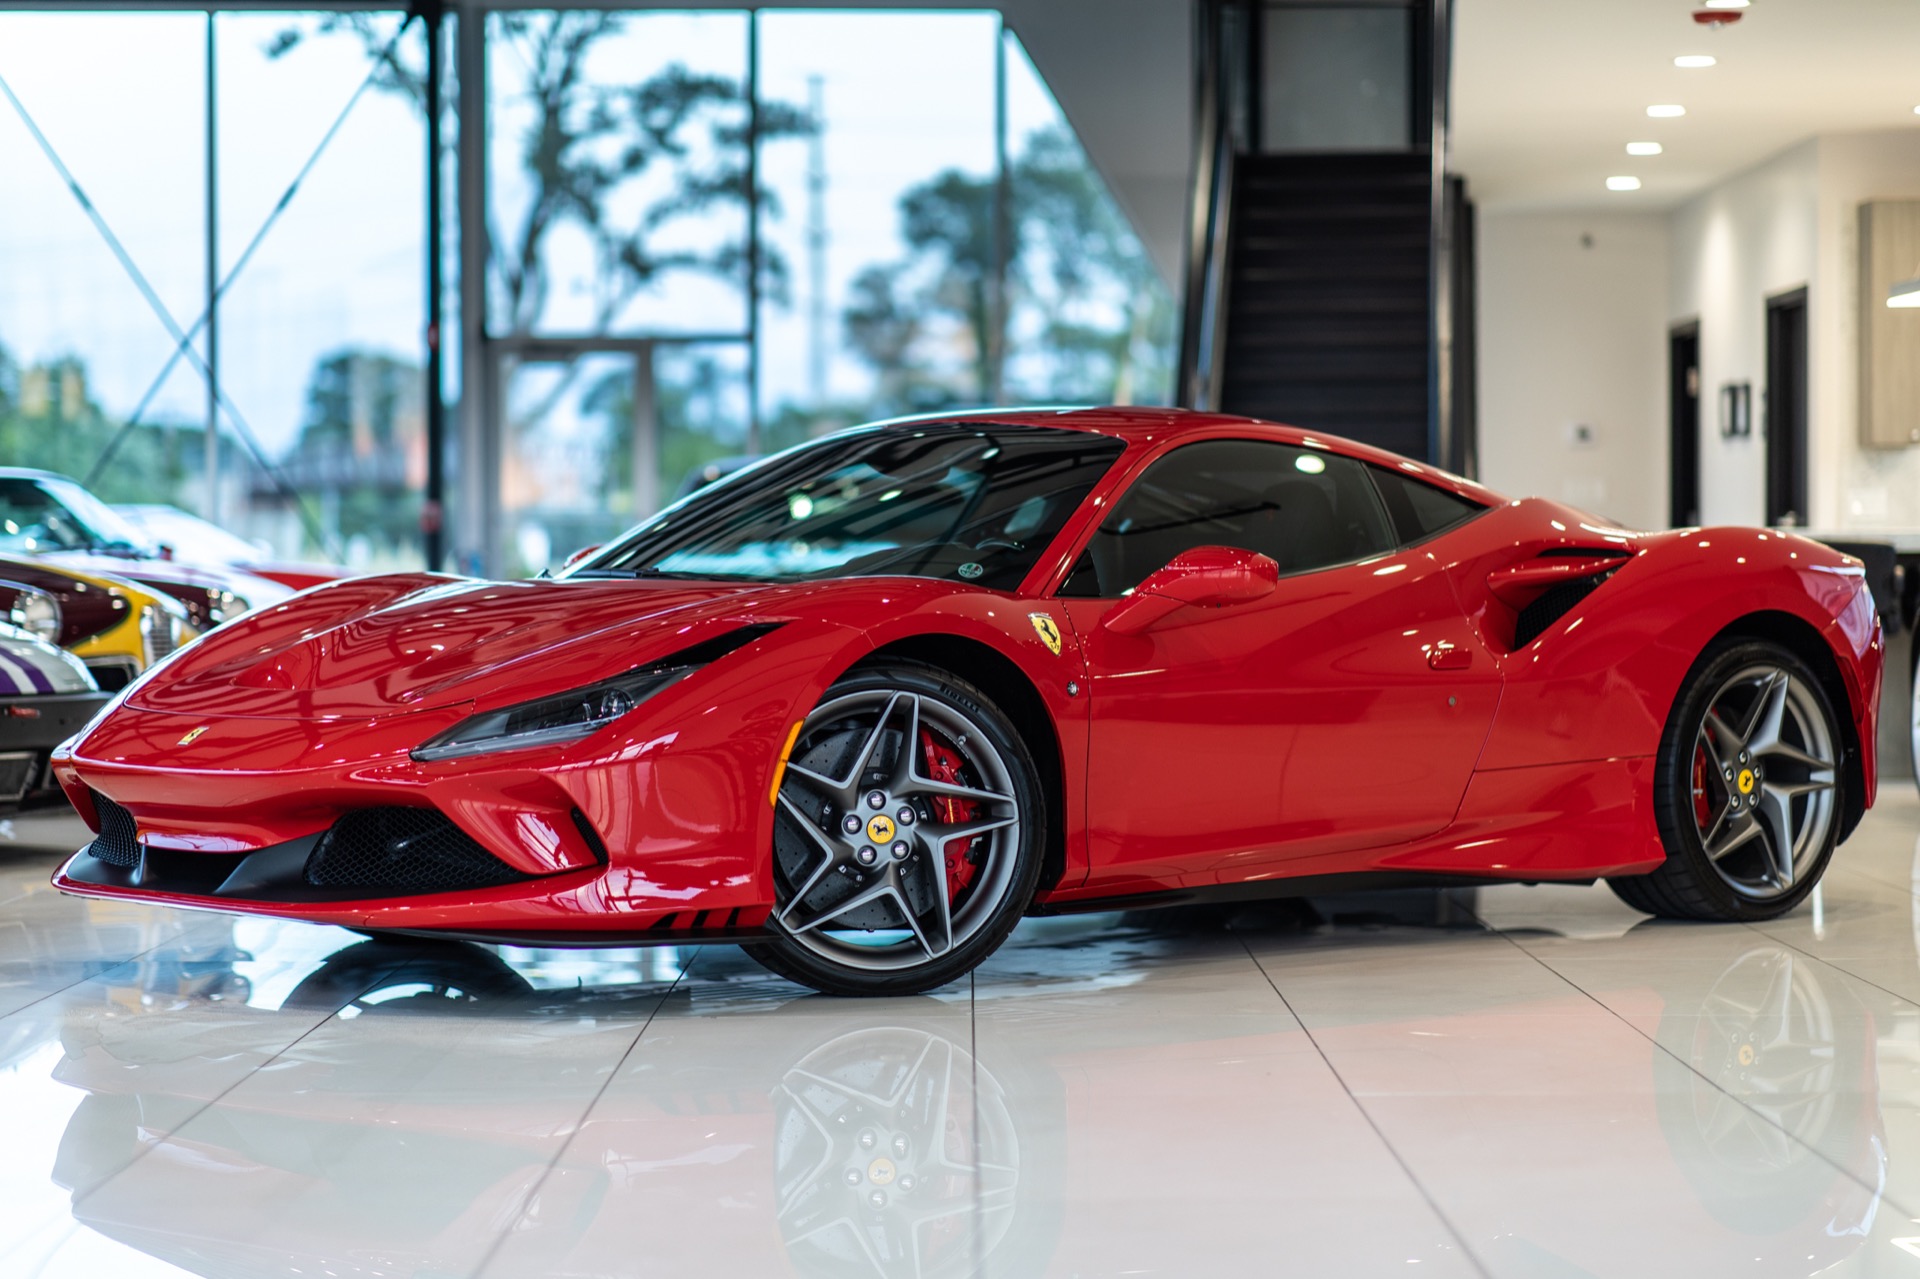 Used 2020 Ferrari F8 Tributo Full Front PPF Like New! For Sale (Special Pricing) | Chicago Motor ...